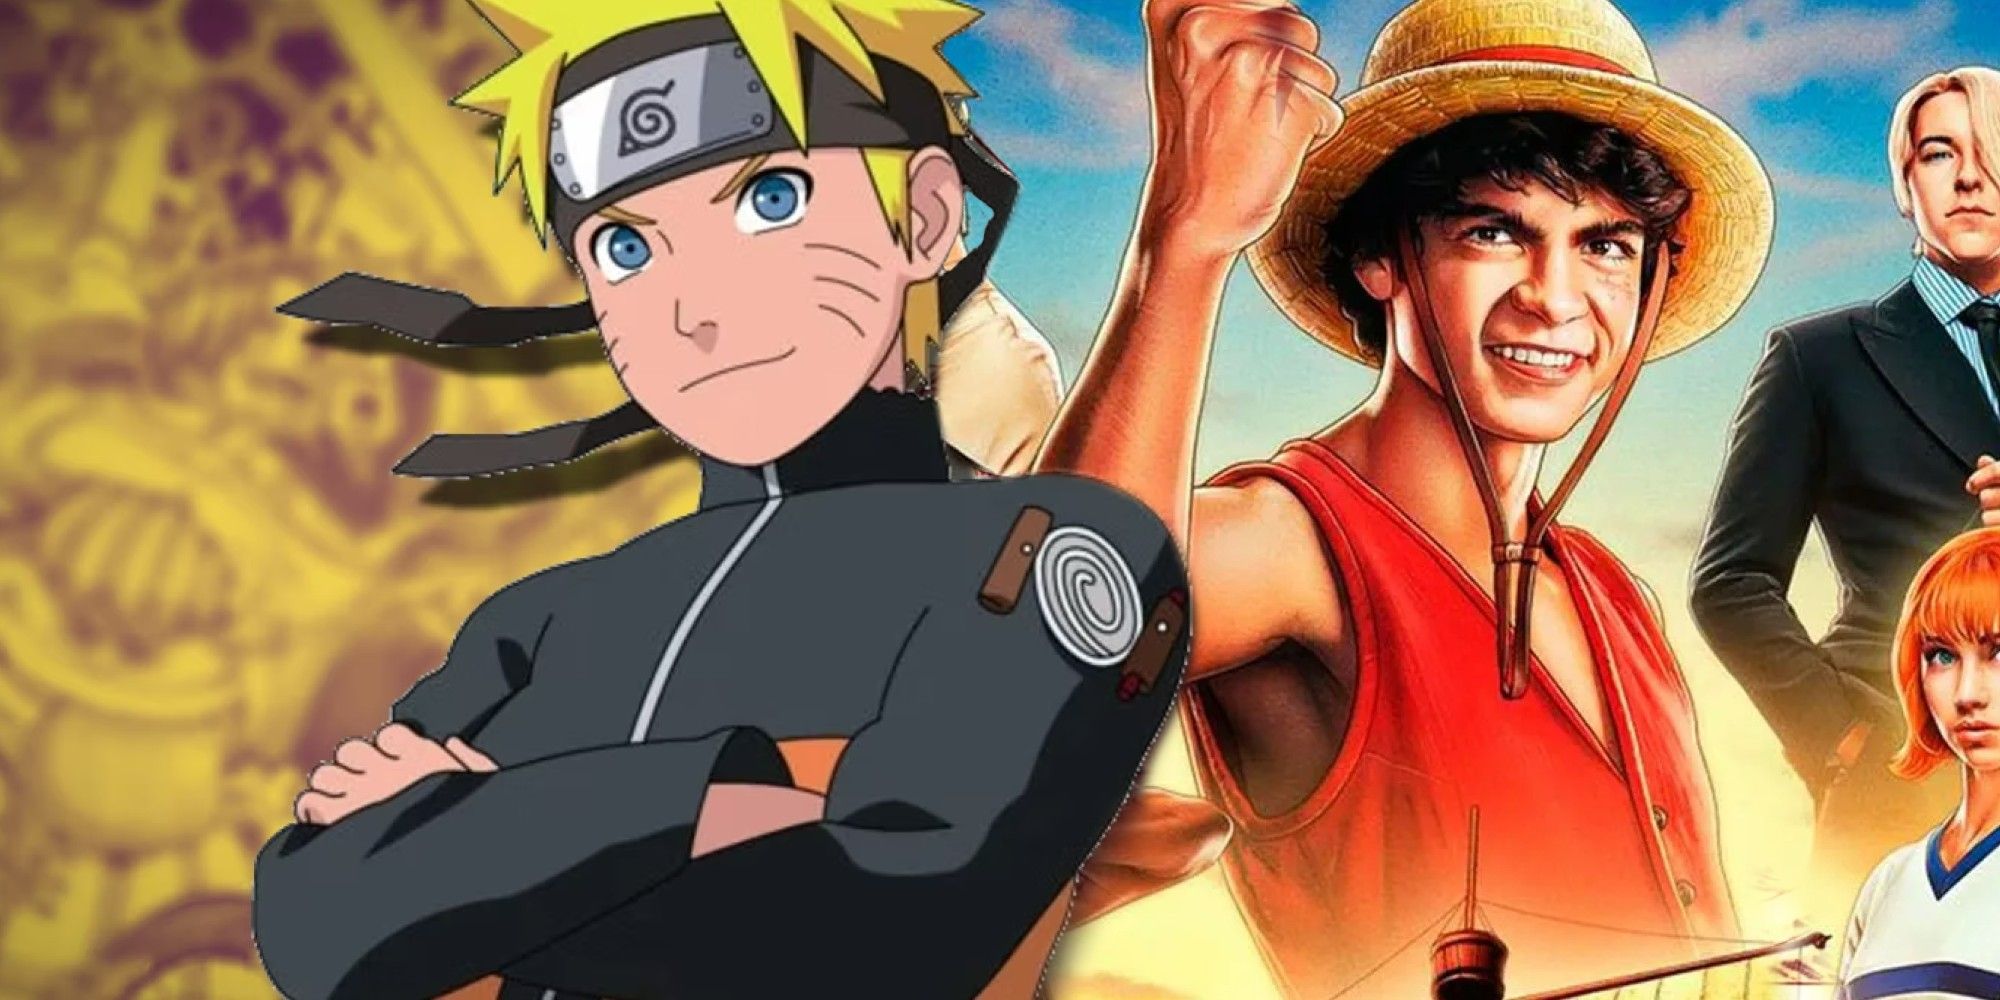 The Live-Action Naruto Movie Should Learn 1 Important Lesson From Netflix’s One Piece